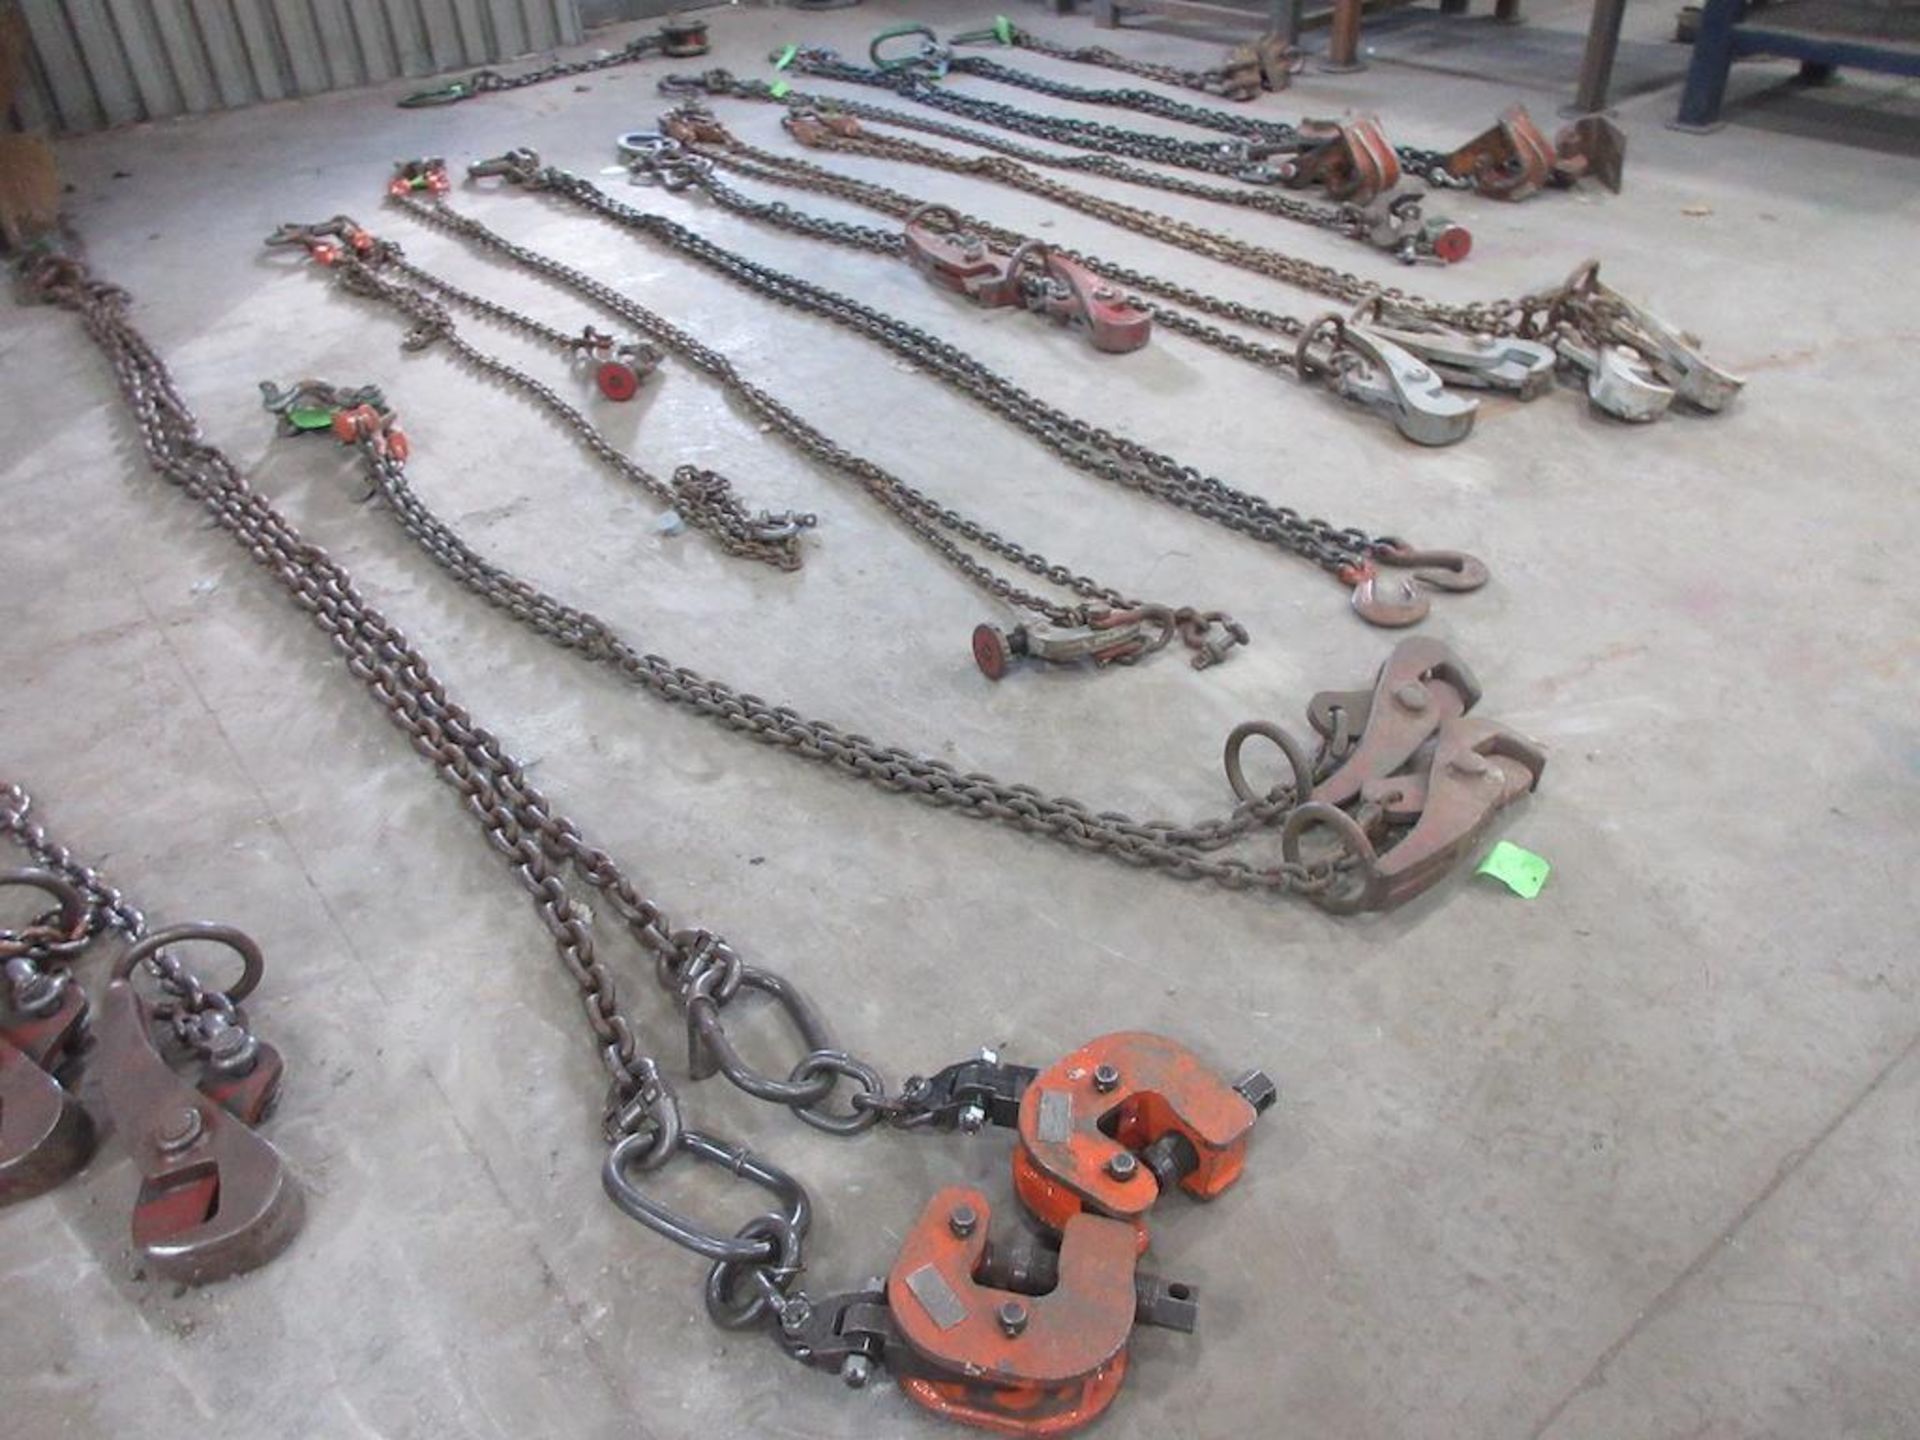 (13) ASSORTED SETS OF HEAVY DUTY LIFTING CHAINS UP TO 6 TON PLATE GRABS